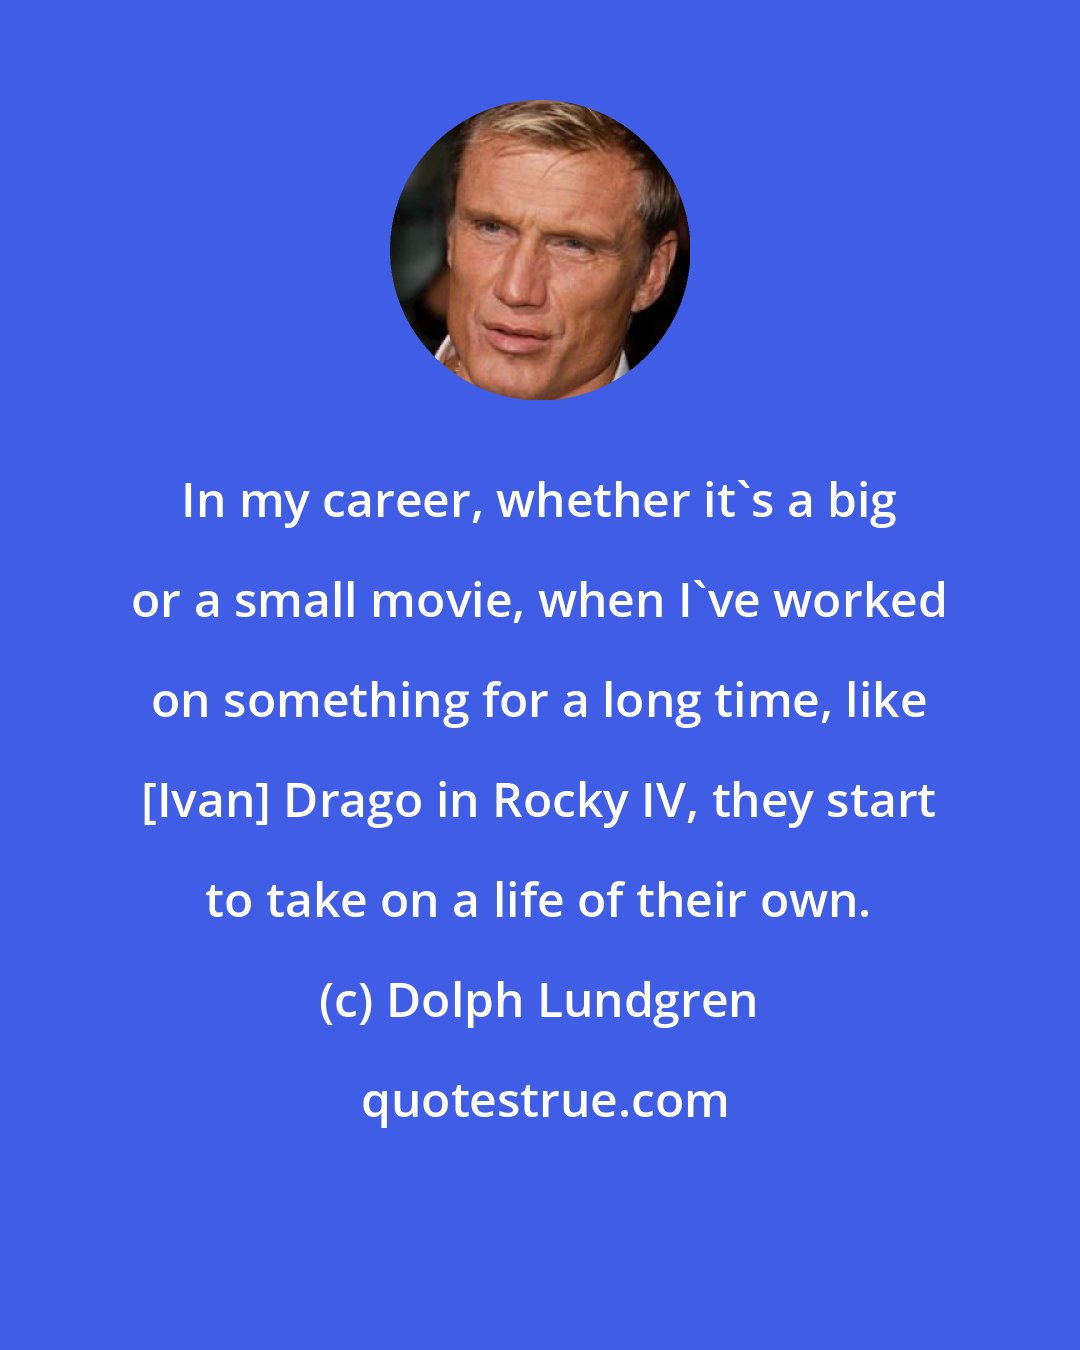 Dolph Lundgren: In my career, whether it's a big or a small movie, when I've worked on something for a long time, like [Ivan] Drago in Rocky IV, they start to take on a life of their own.